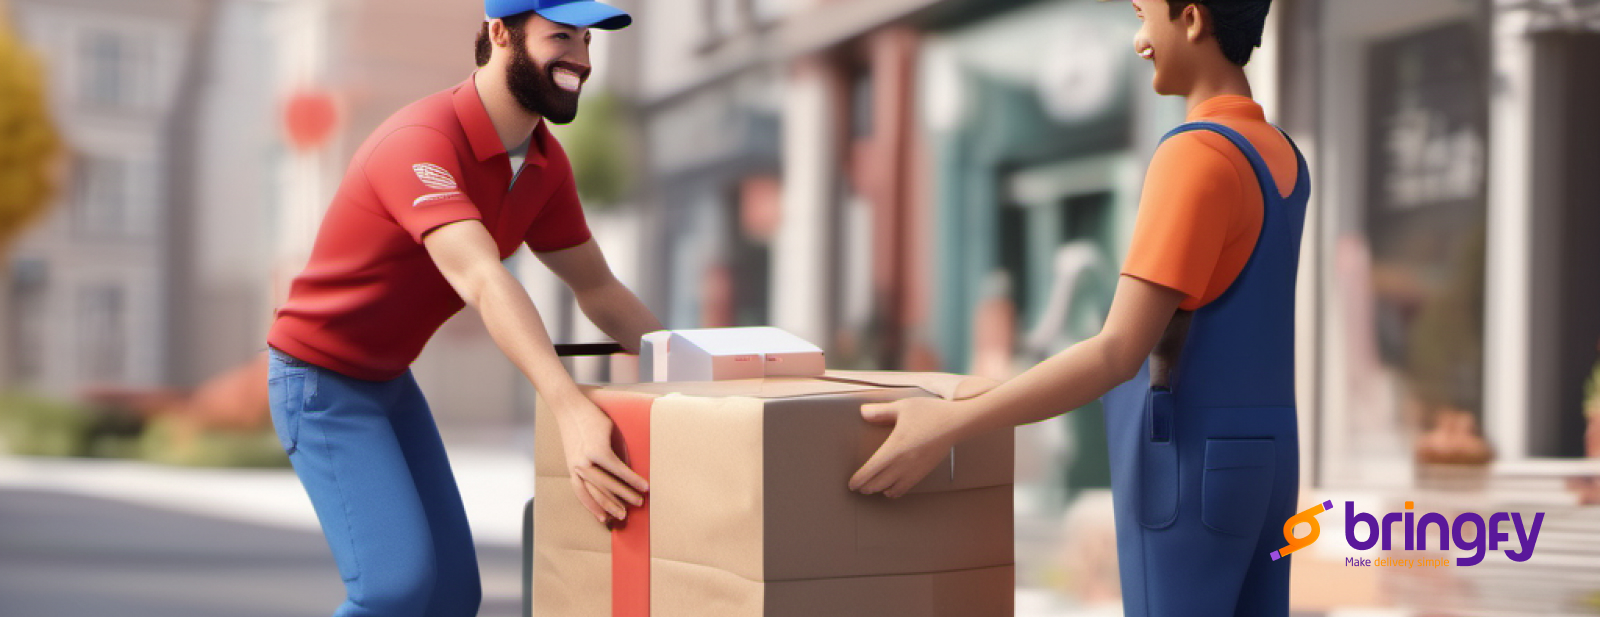 Delivery donations seamlessly